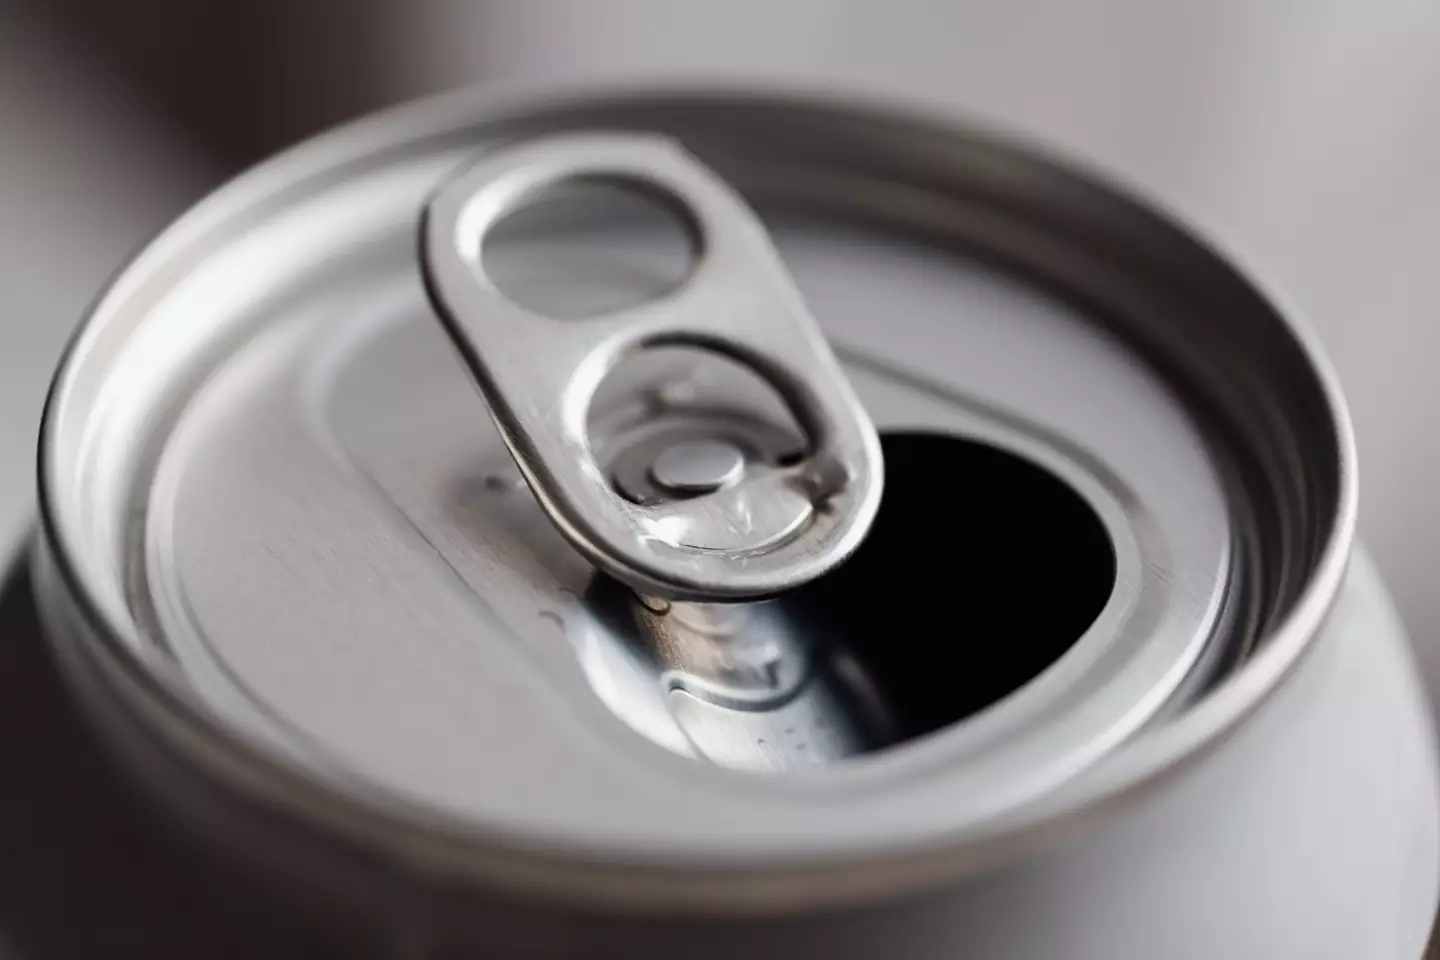 IARC has classified the chemical found in 'diet' sodas in Group 2B for cancer hazards.